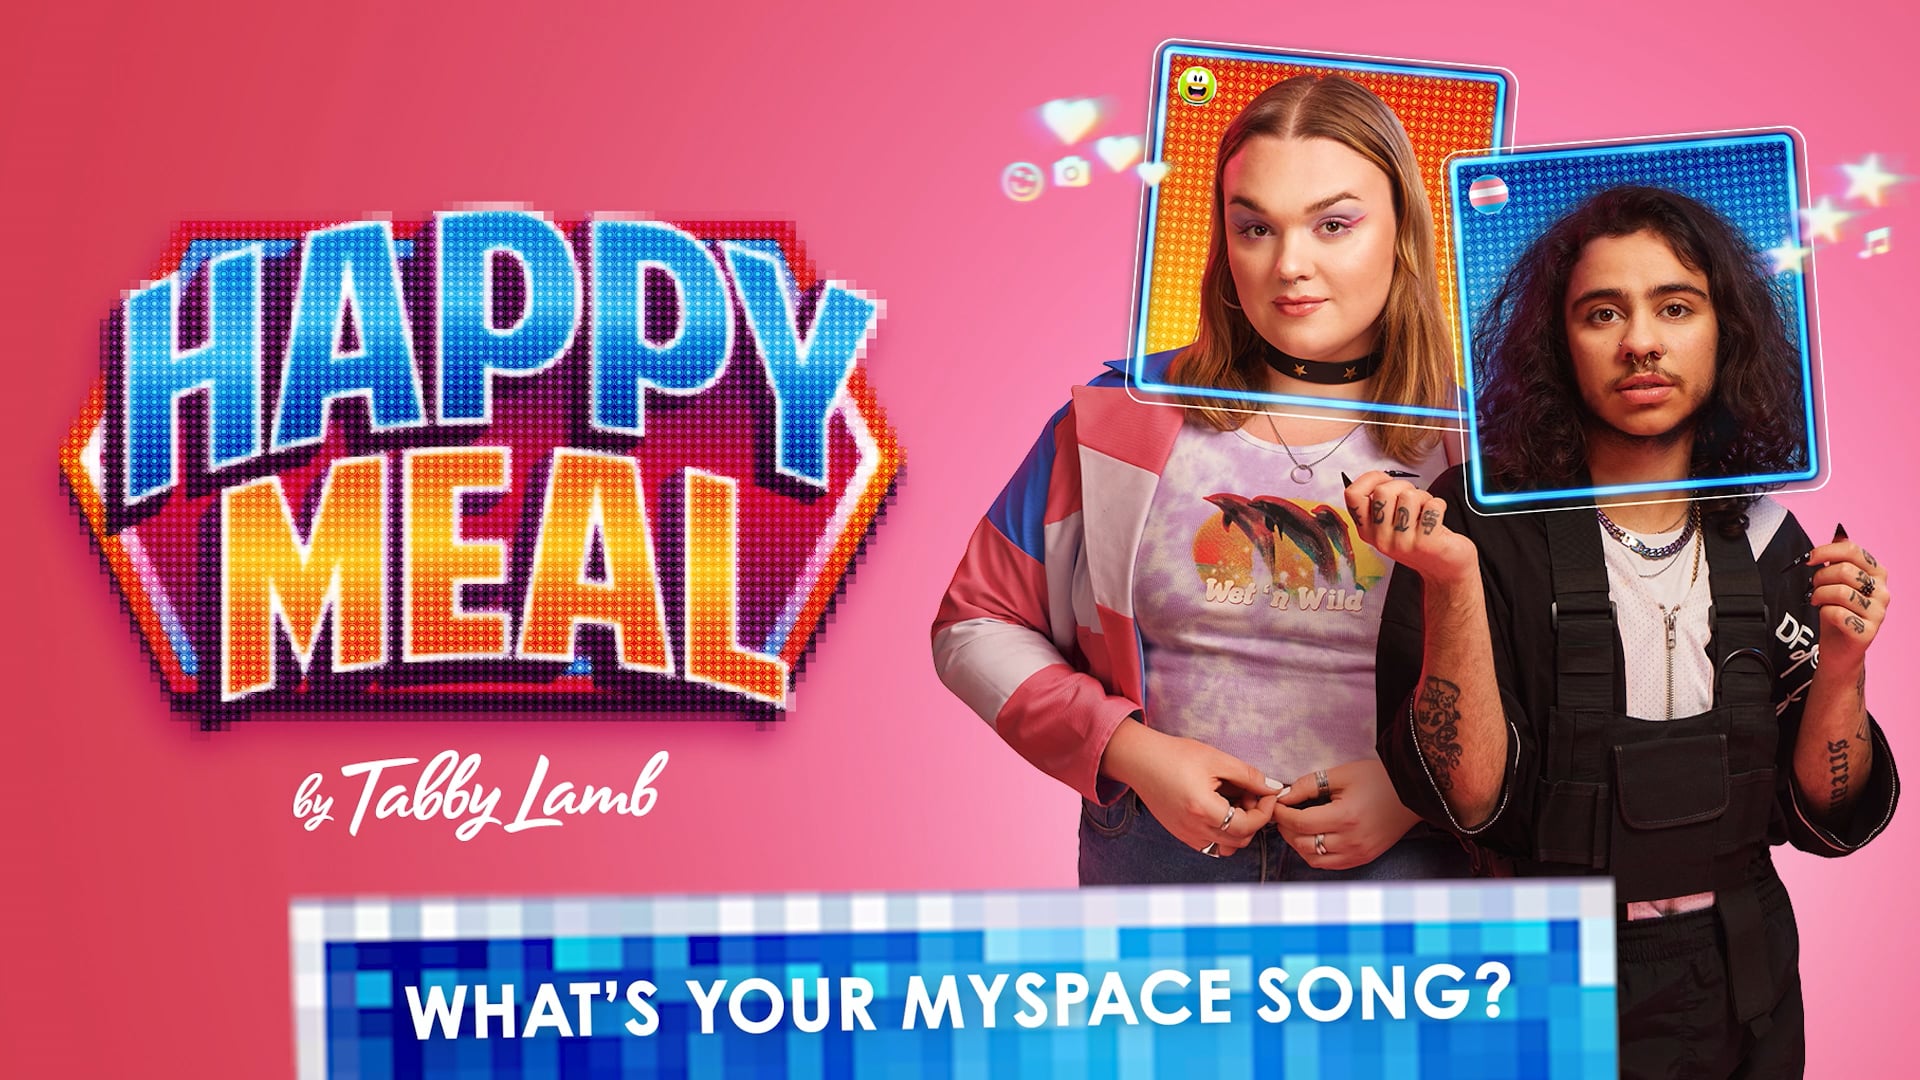 Happy Meal - Your Myspace song